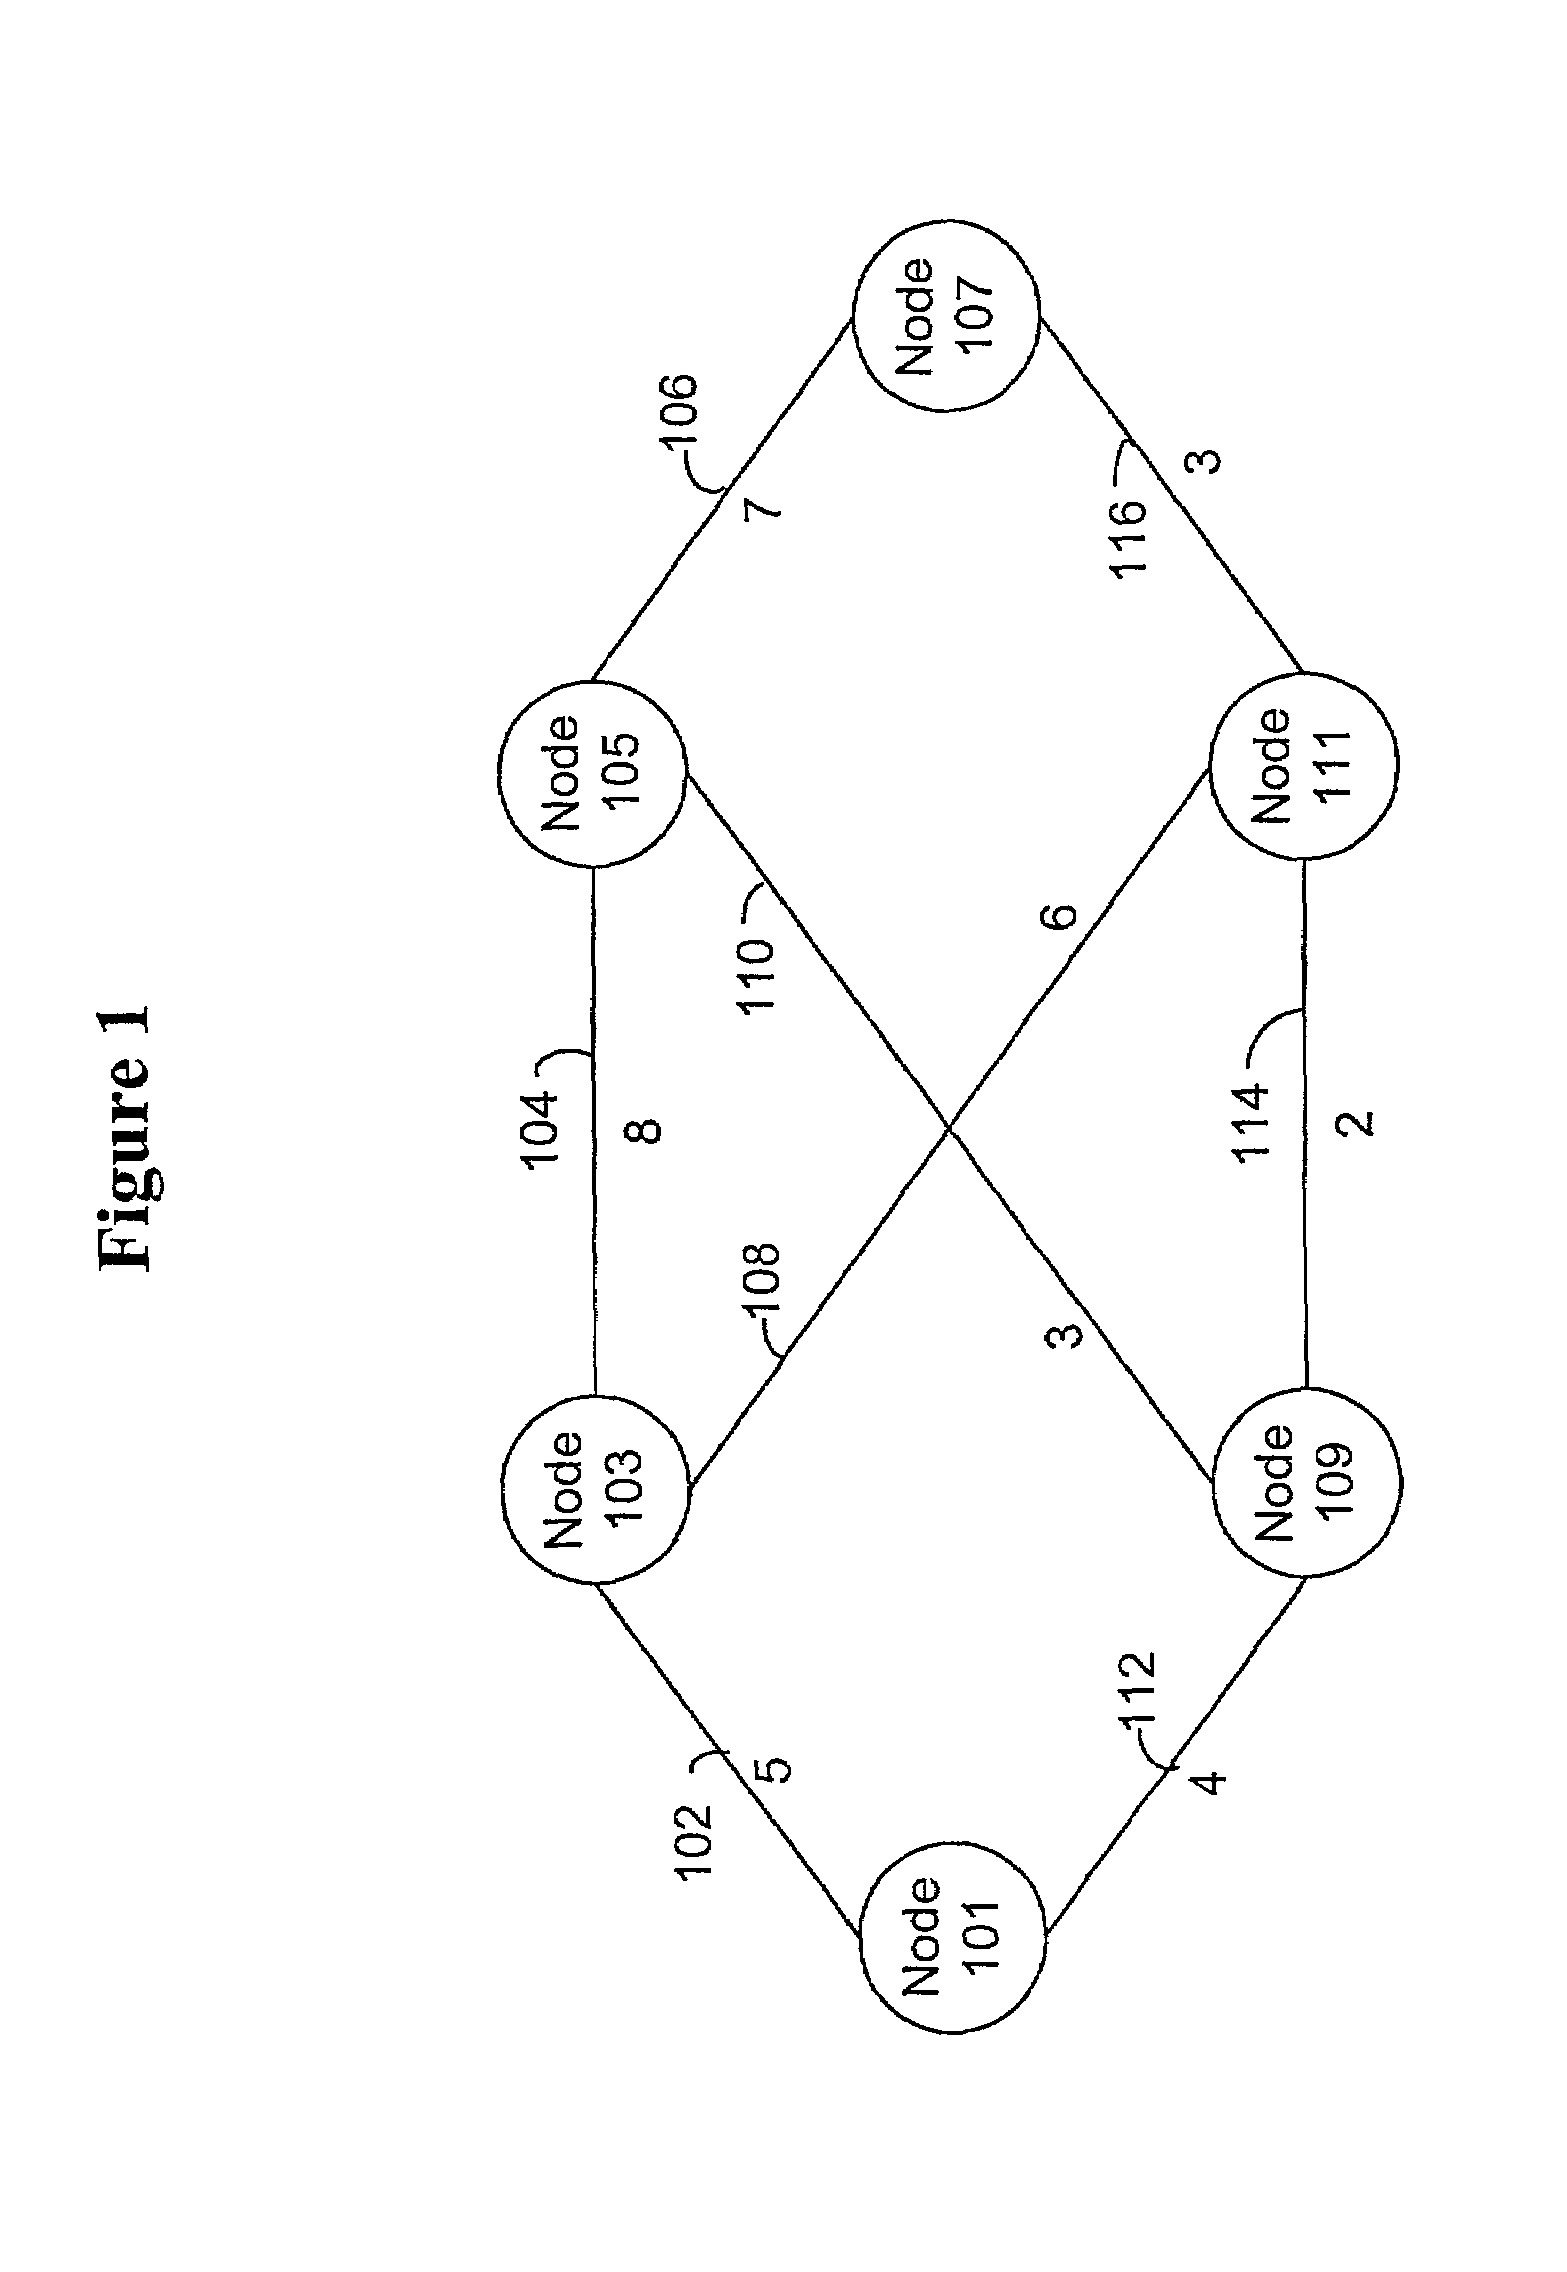 Methods and apparatus for generating network topology information